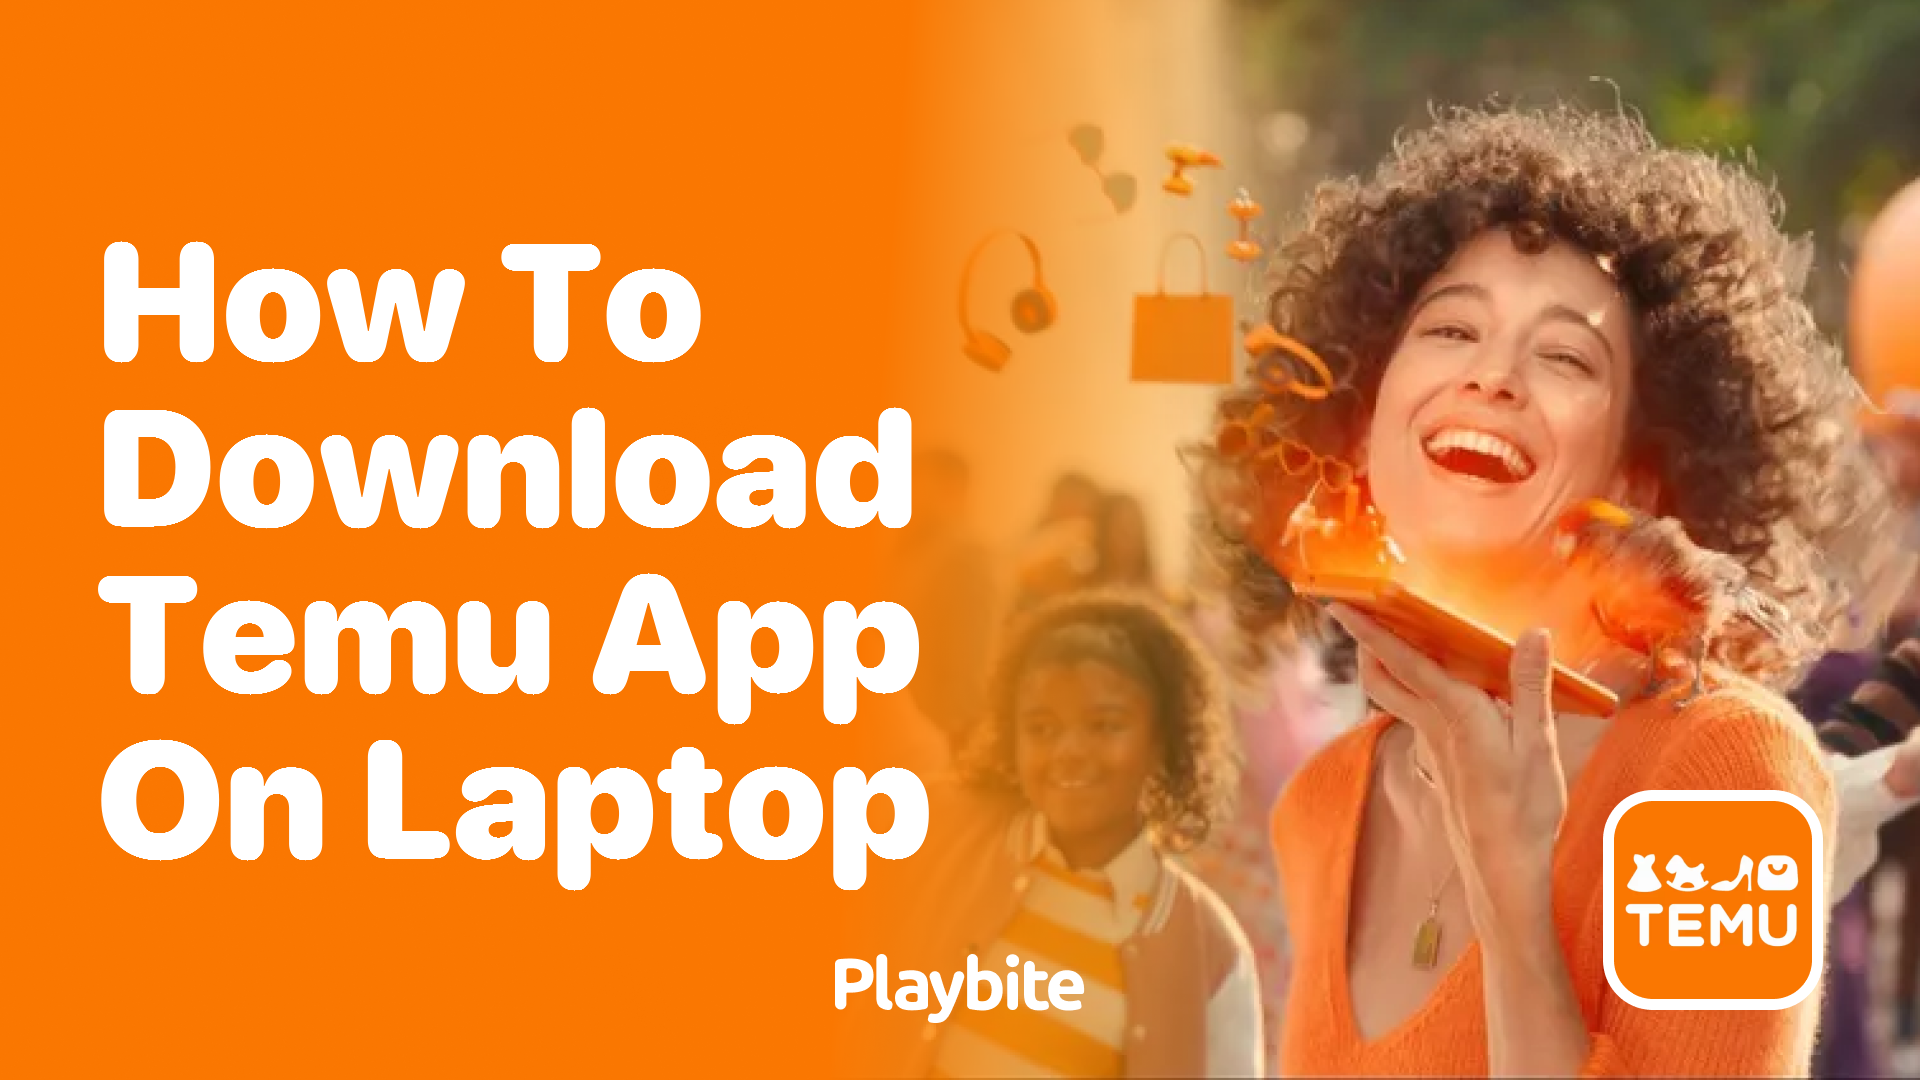 How to Download the Temu App on Your Laptop